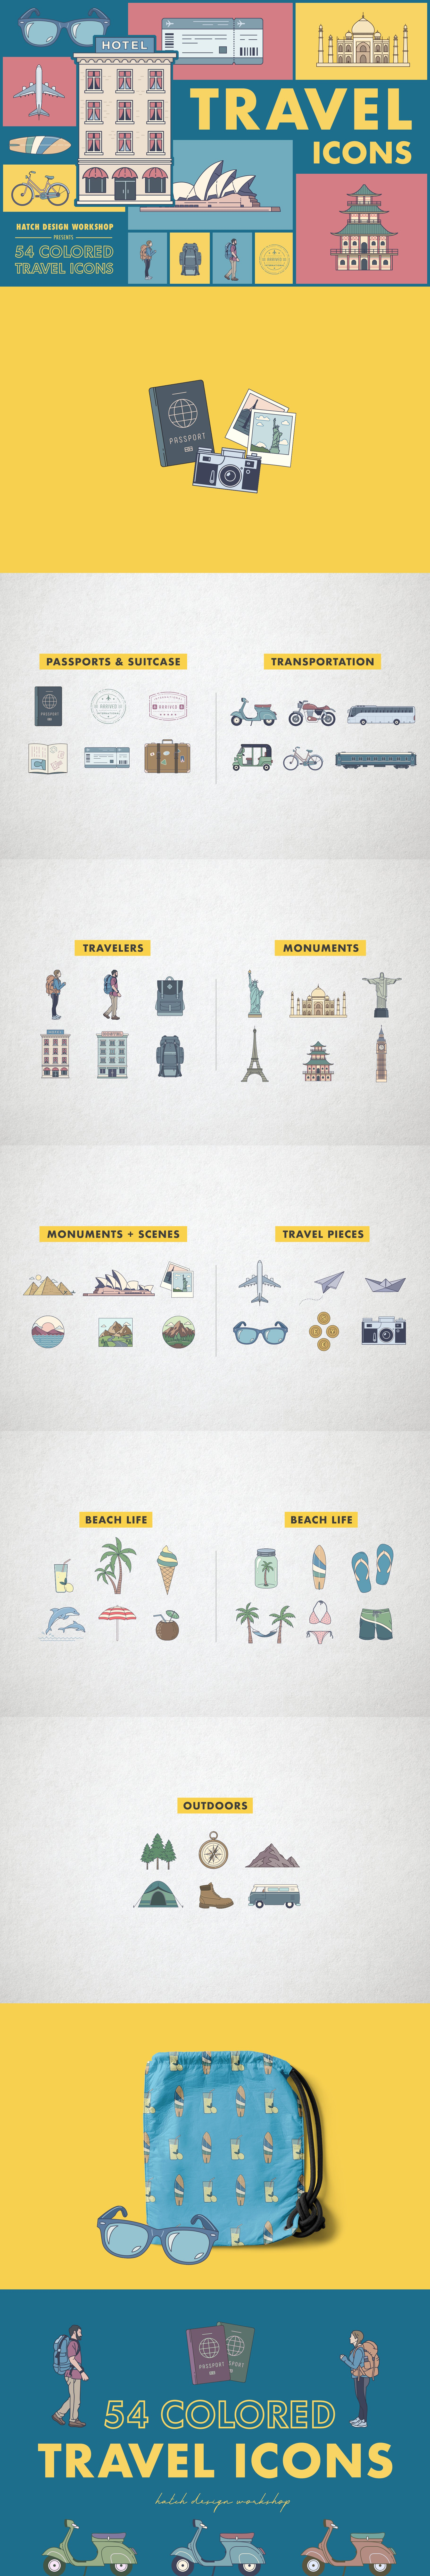 54 Colored Travel Icons cover image.